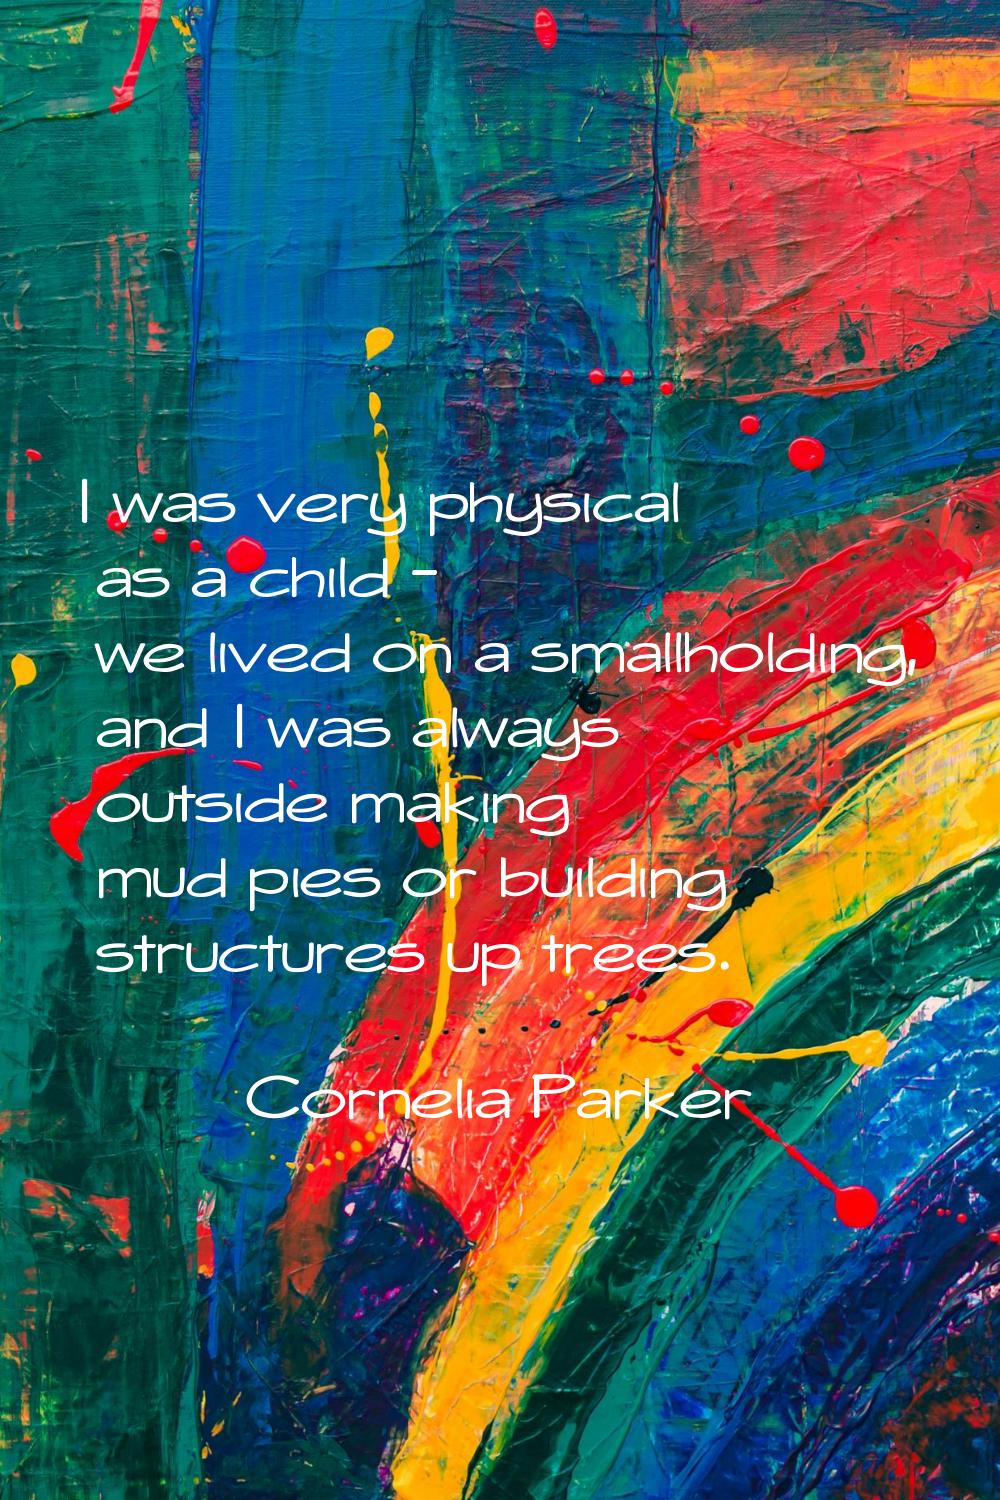 I was very physical as a child - we lived on a smallholding, and I was always outside making mud pi